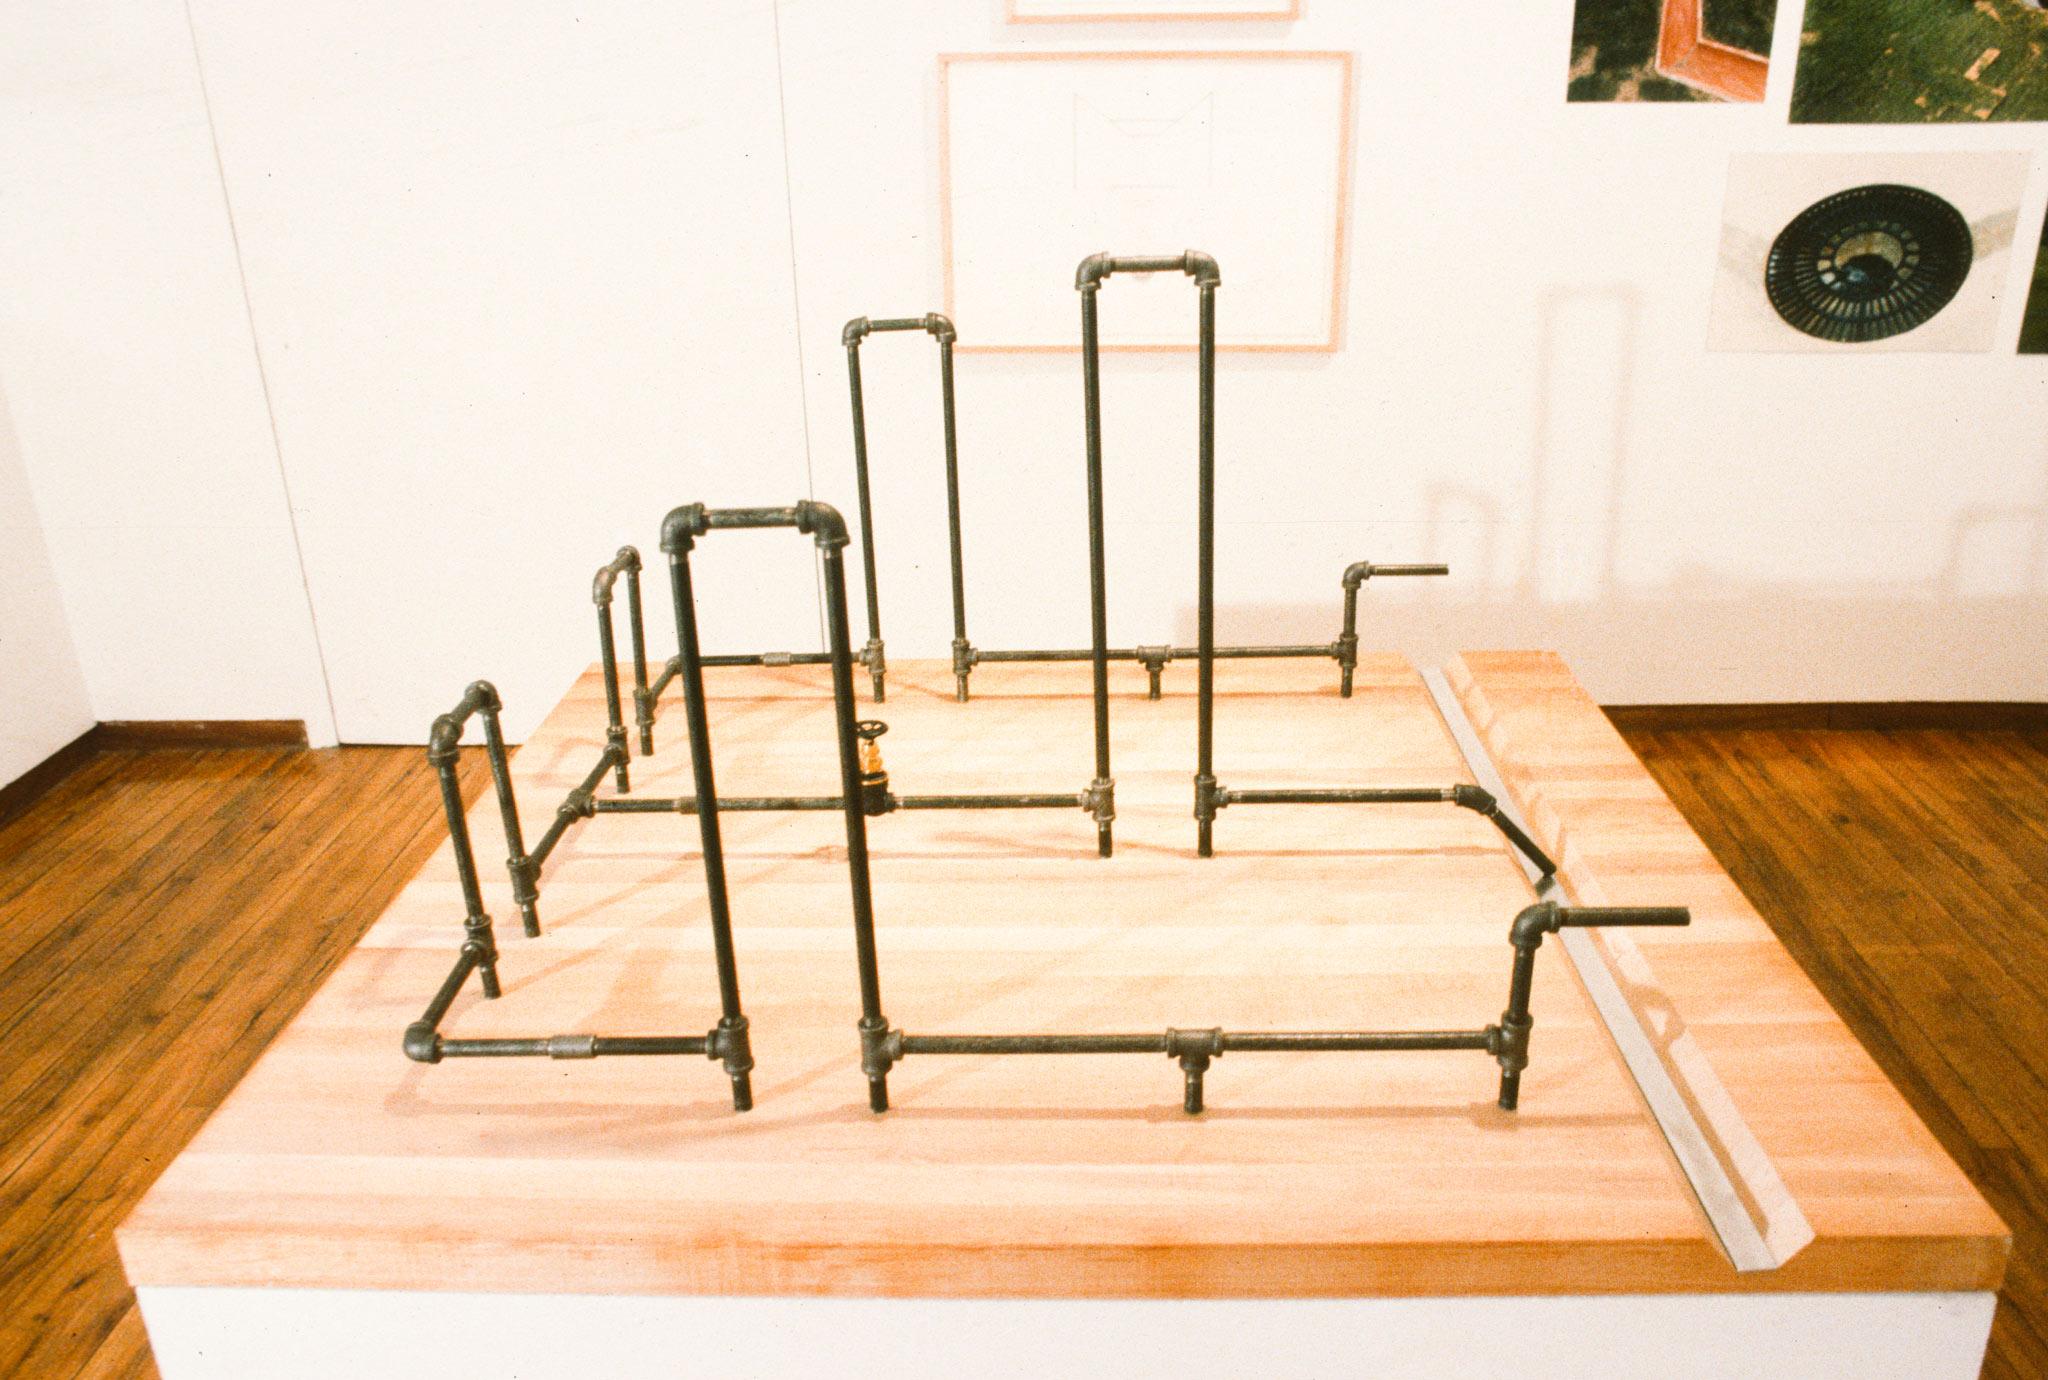 a small model of made of metal pipes to depict a square strucuture